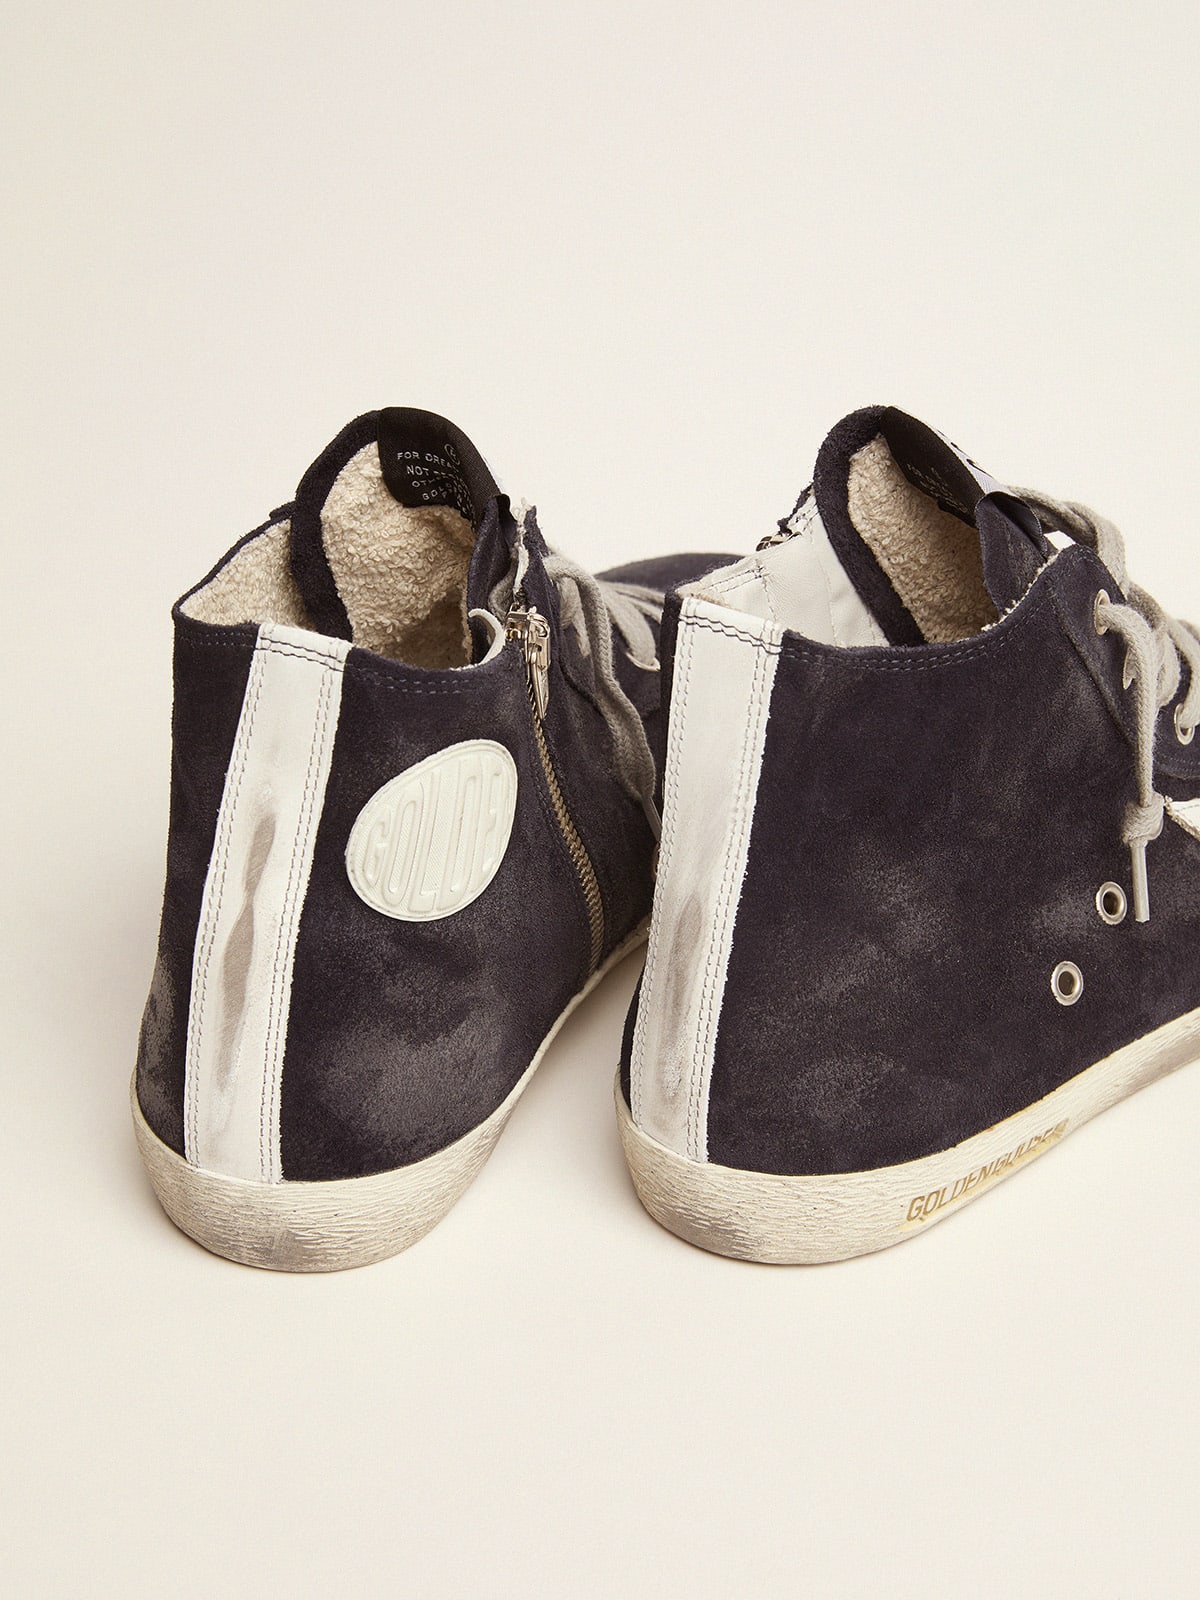 Francy sneakers in leather with leather star and heel tab